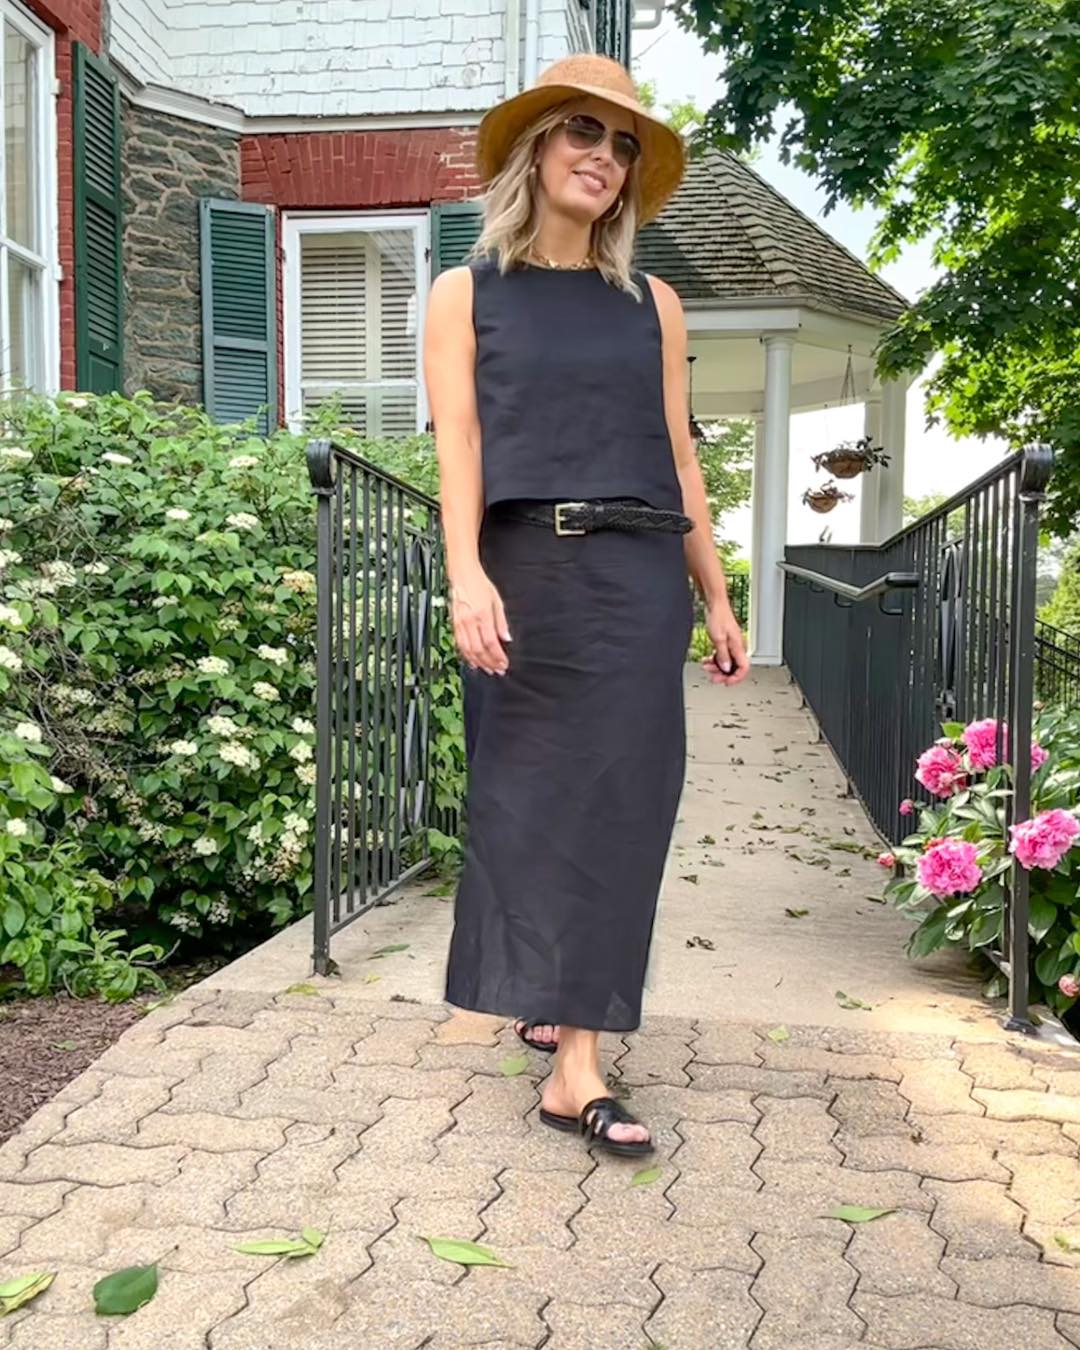 How to Wear Black in Summer